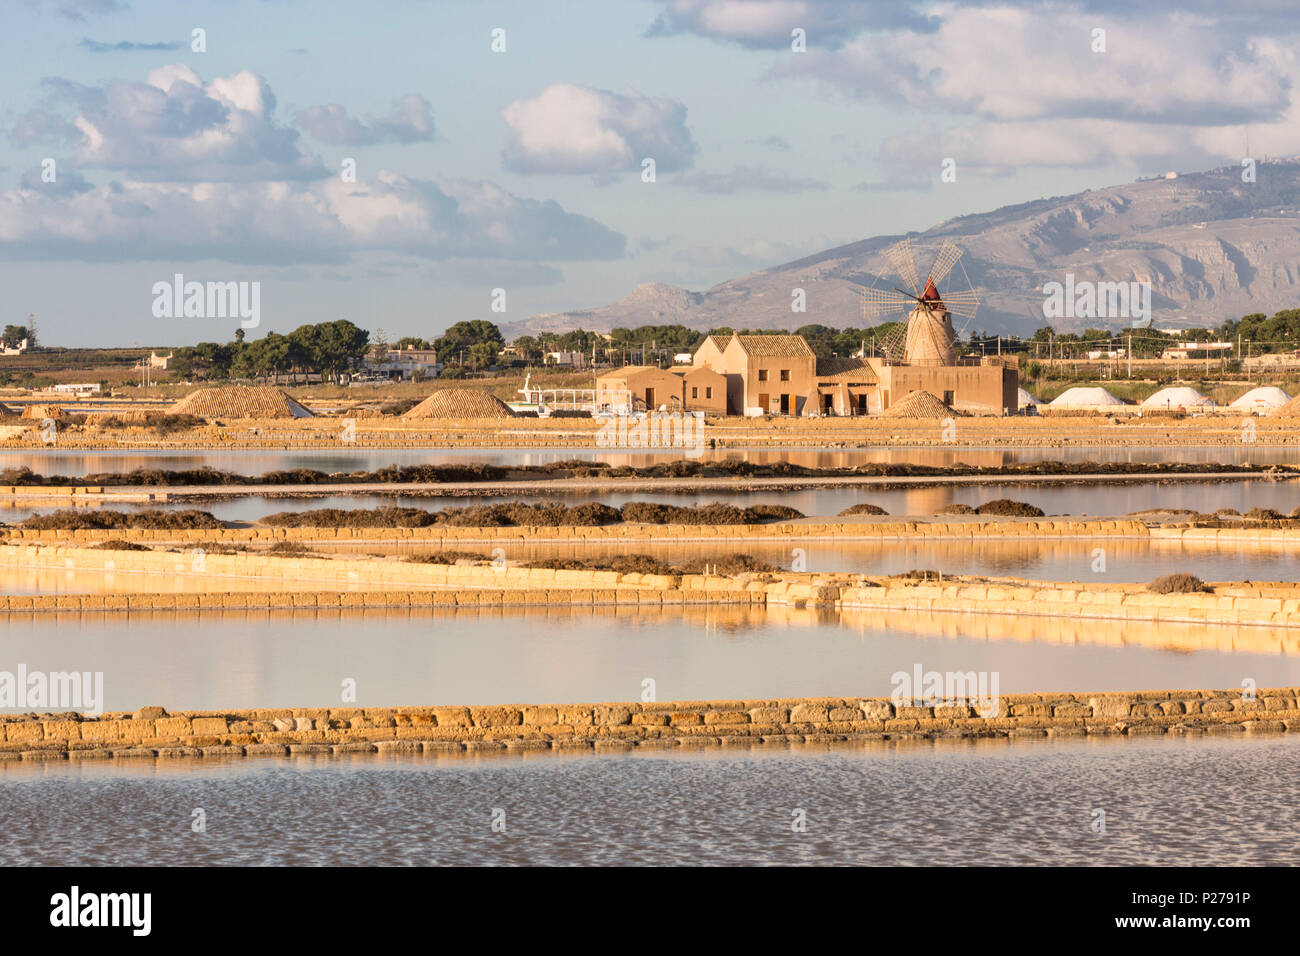 Salt pans in front of Infersa windmill on the coast connecting Marsala to Trapani, Trapani province, Sicily, Italy Stock Photo